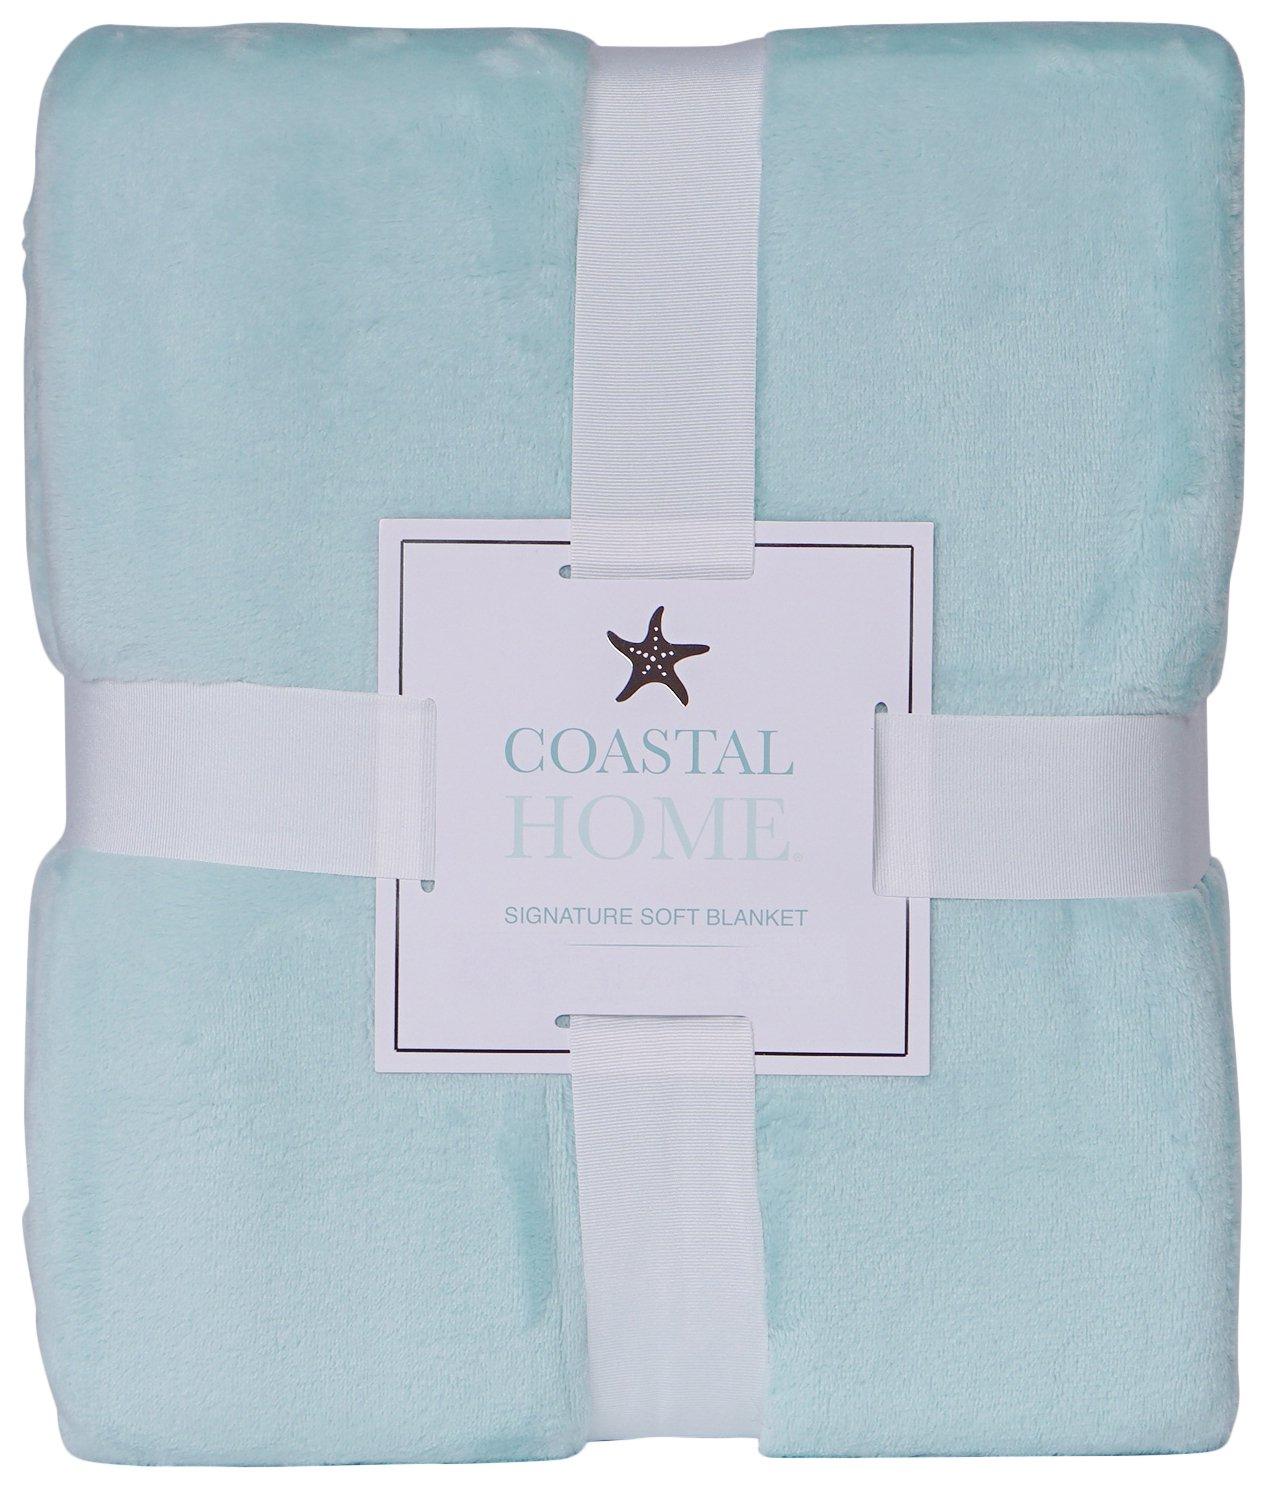 This 'Very Plush' Throw Blanket Is Up to 43% Off at